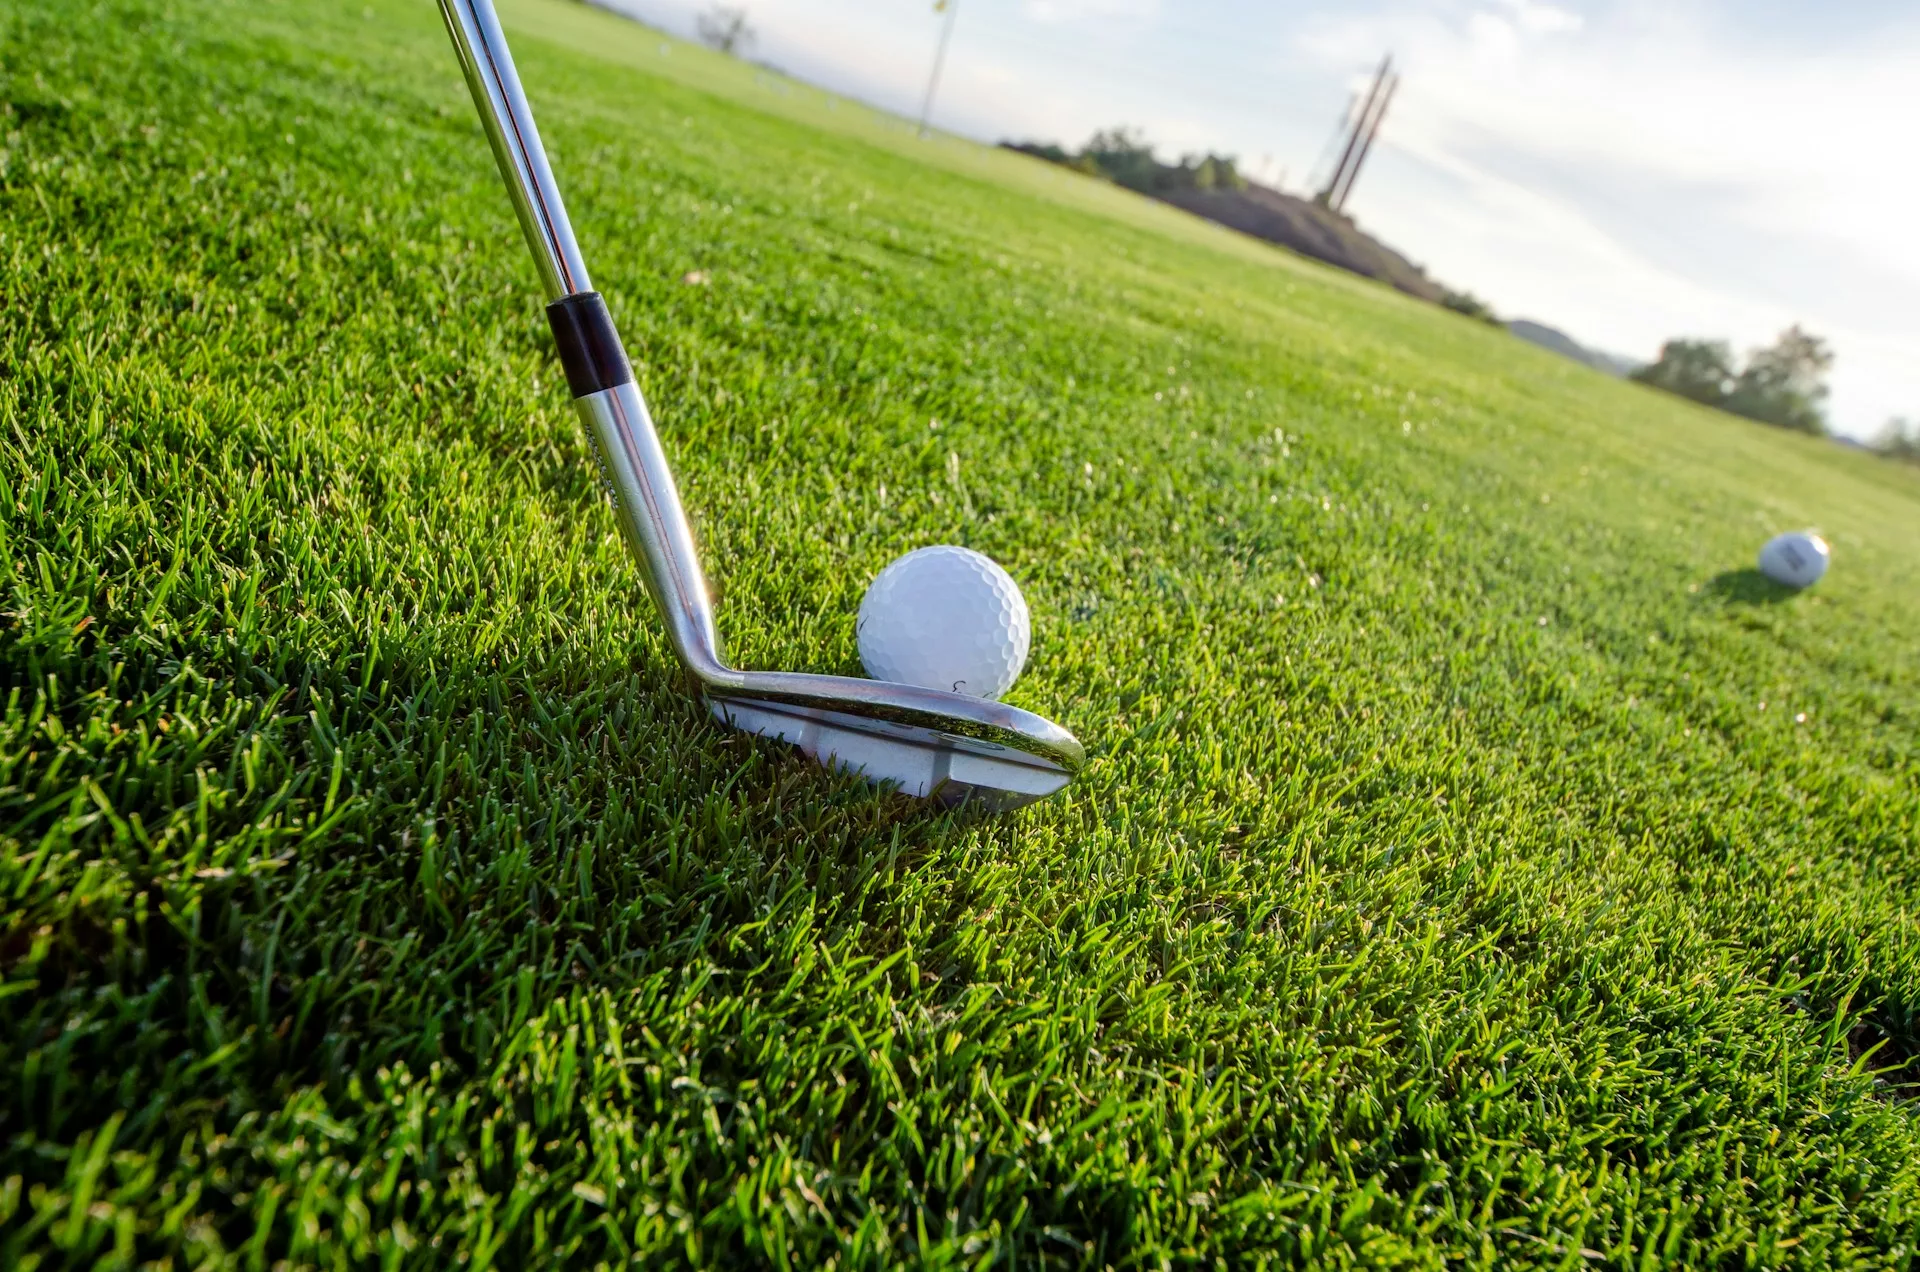 A golf club lined up to hit a ball on the course, symbolizing determination and skill.